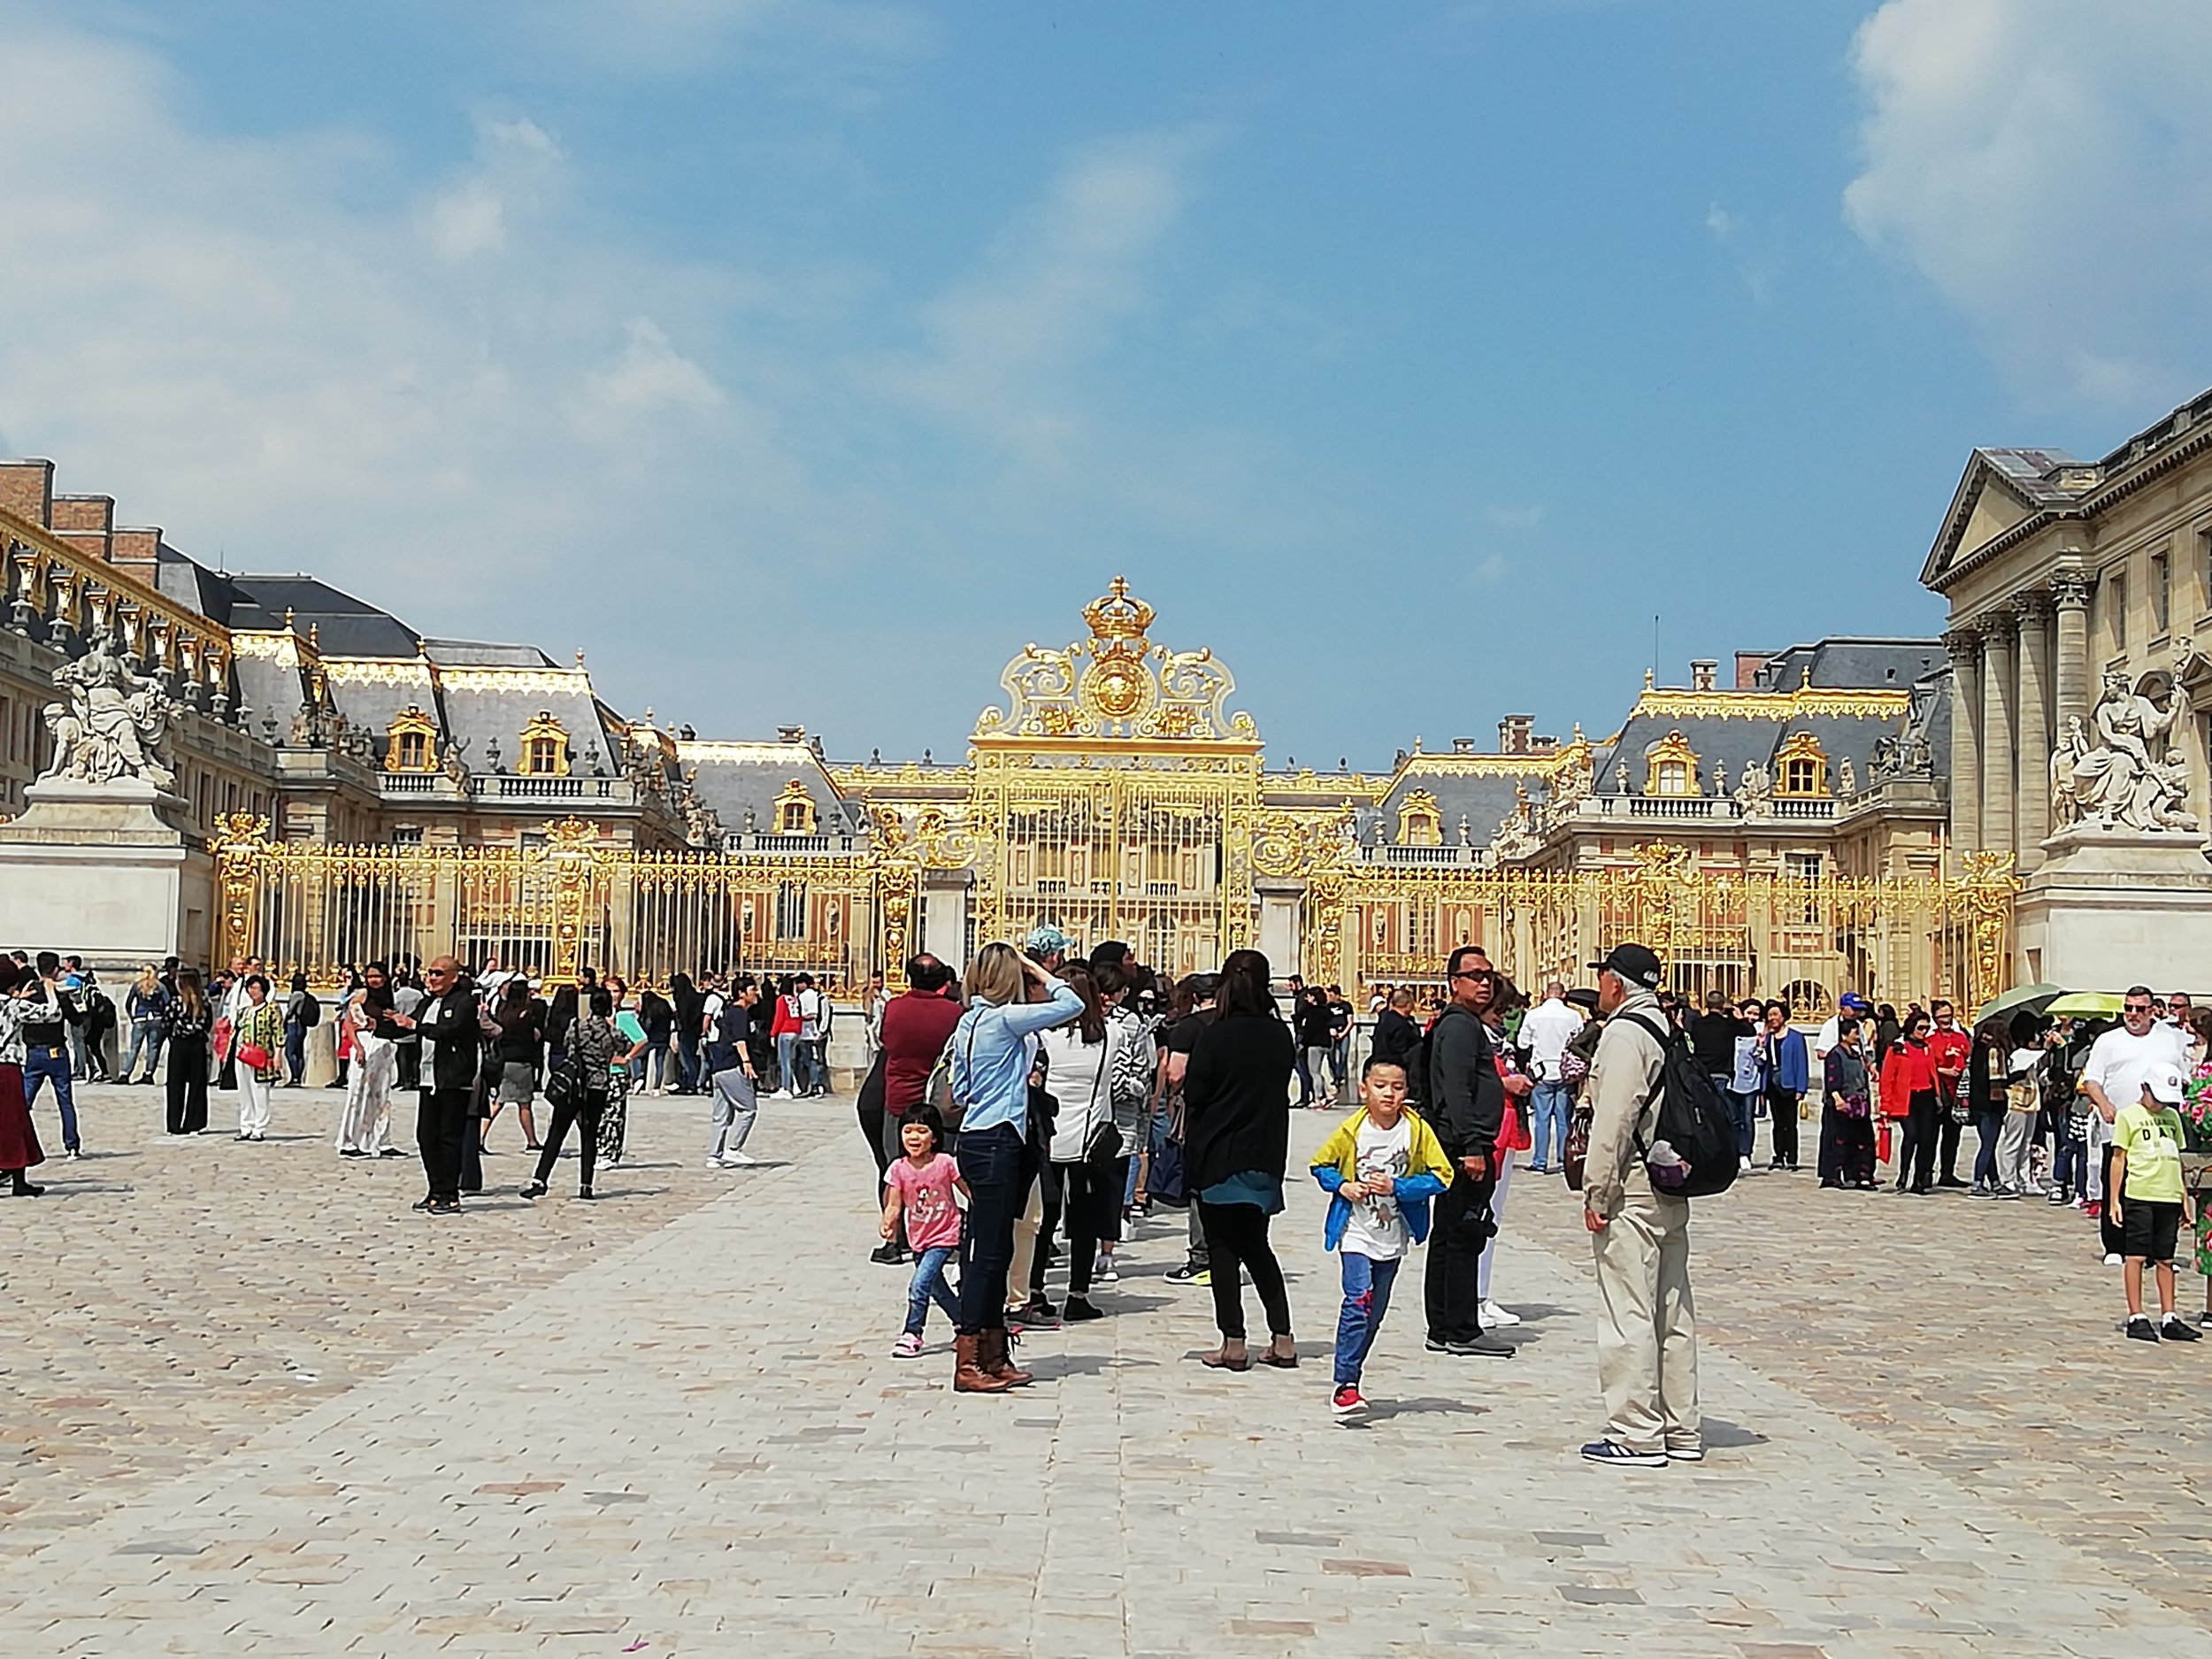 The quiet time at Palace of Versailles